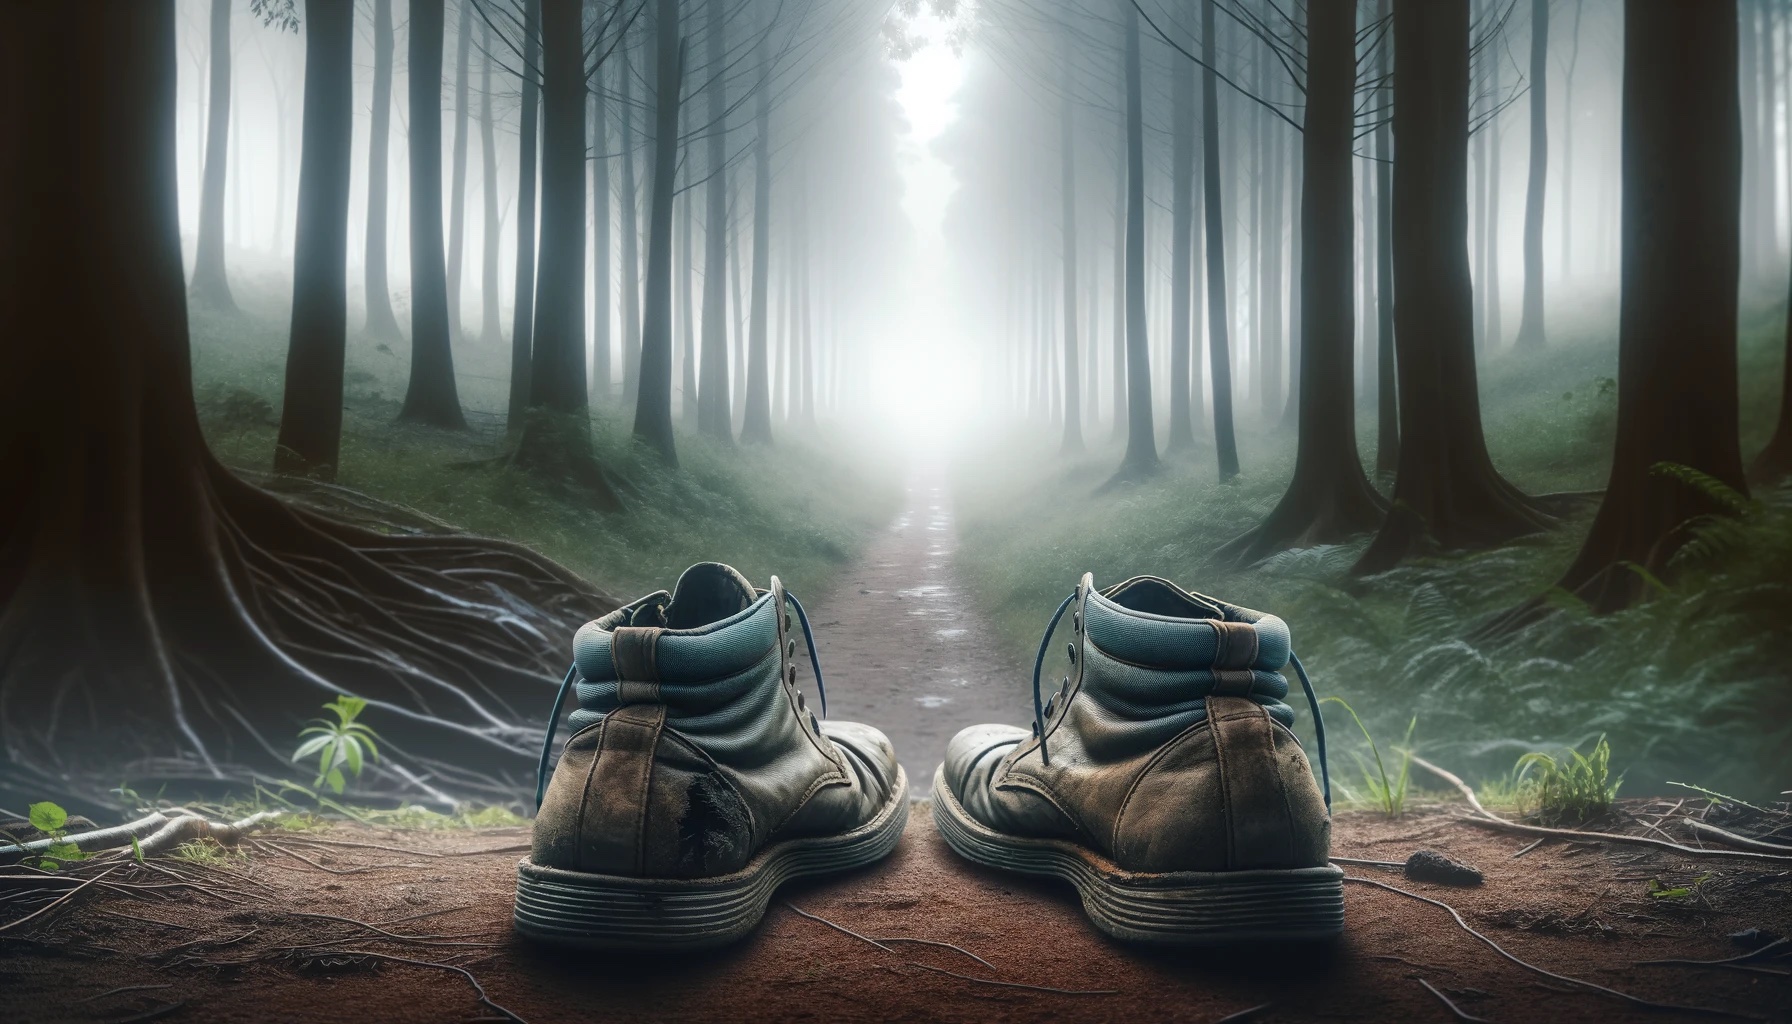 A pair of worn-out shoes at the edge of a path leading into a misty forest.